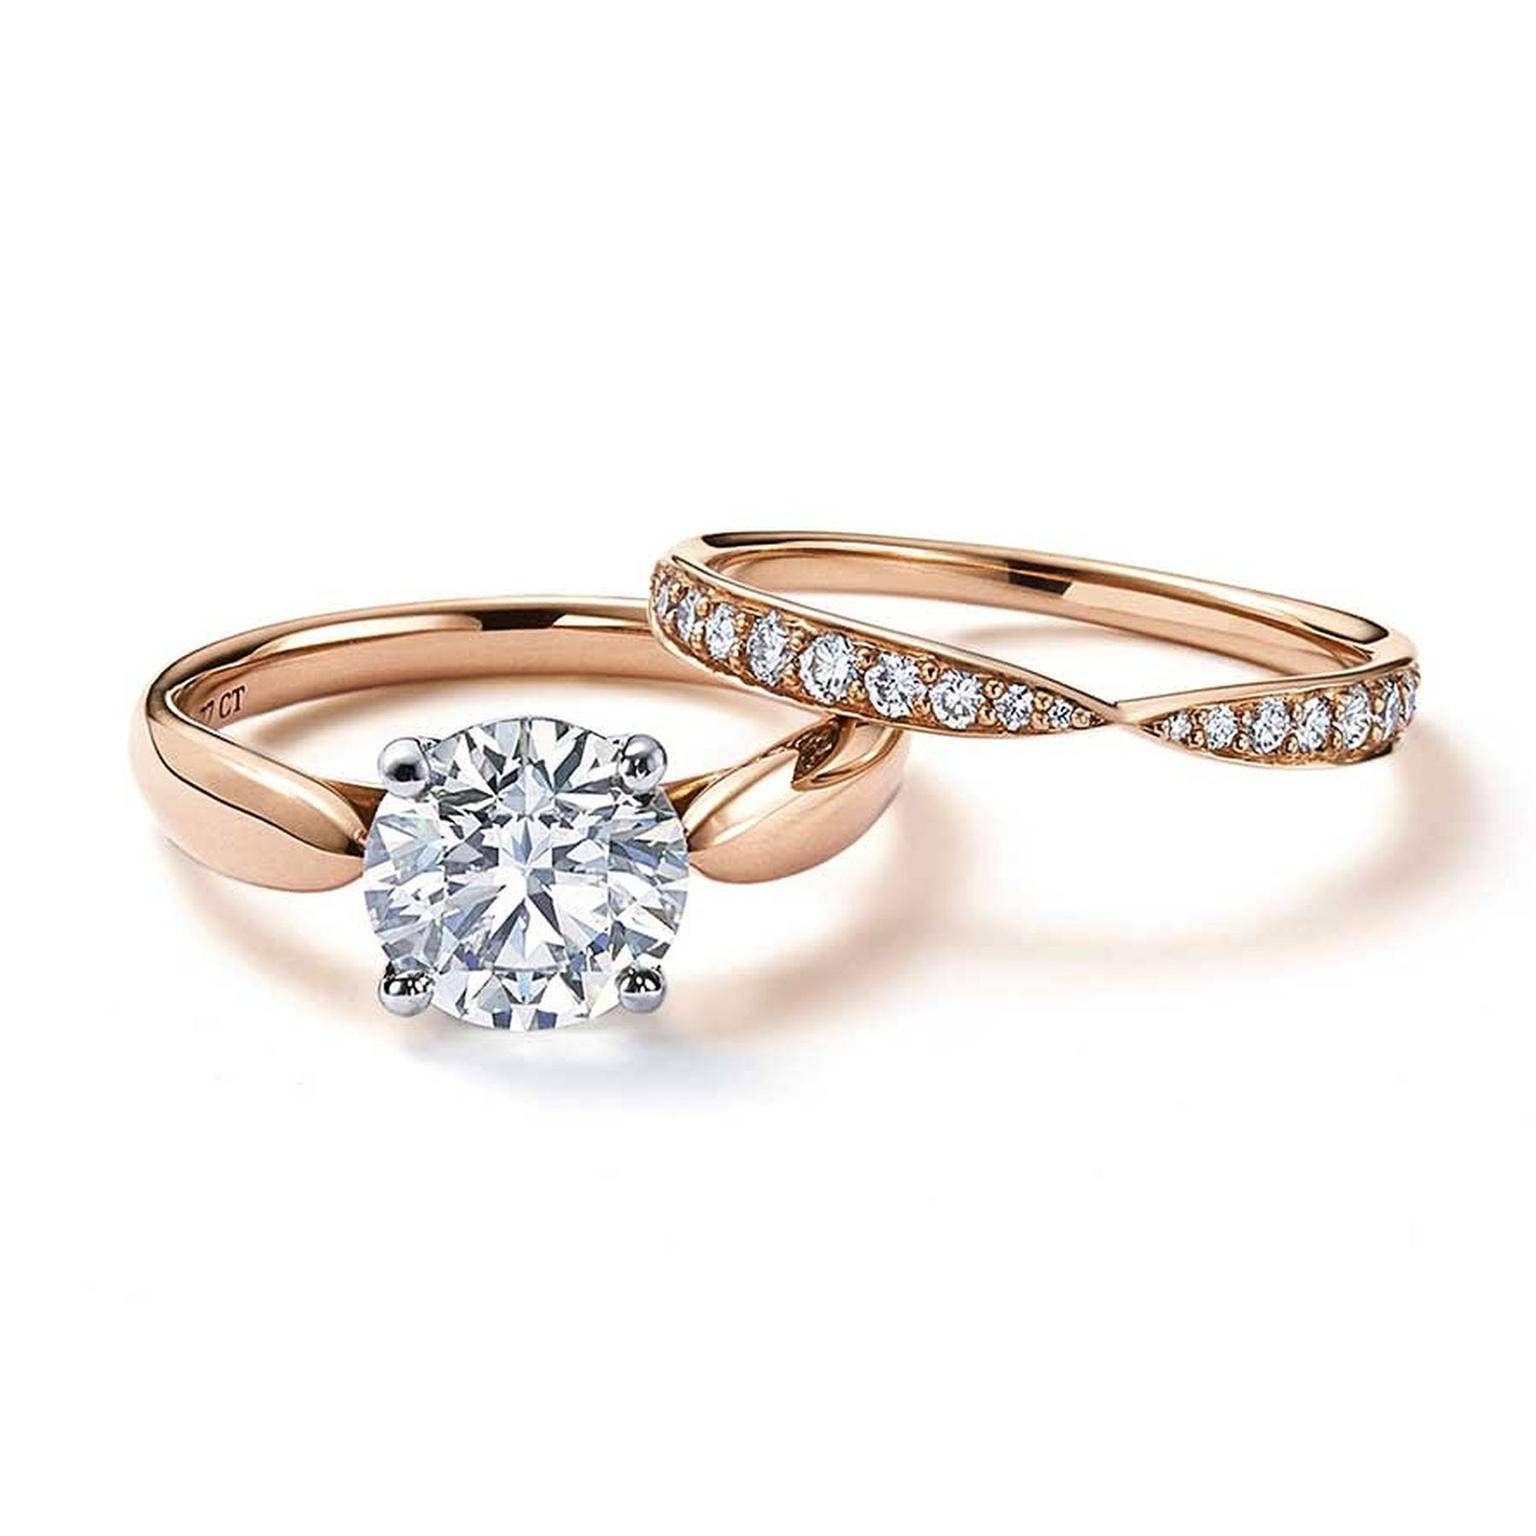 Tiffany Has Captured Our Hearts With Its Rose Gold Engagement Regarding Tiffanys Wedding Bands (Photo 134 of 339)